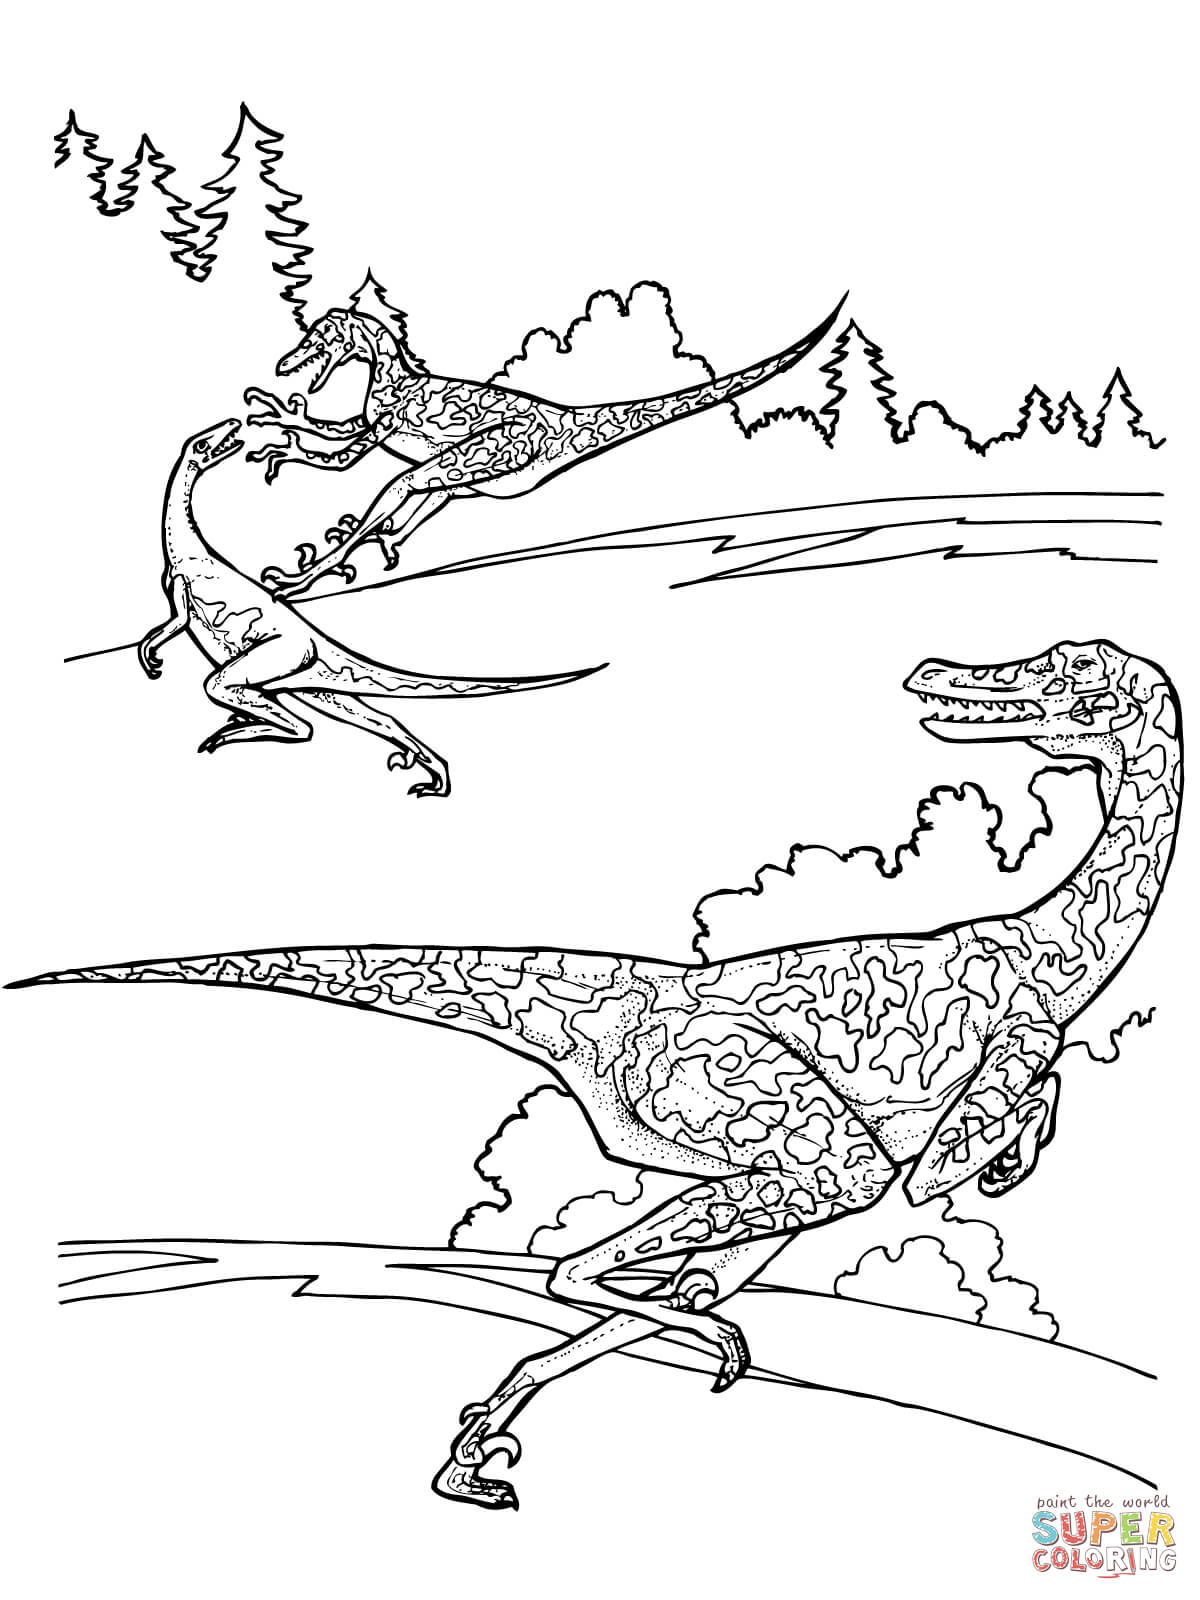 velociraptor colouring in pages